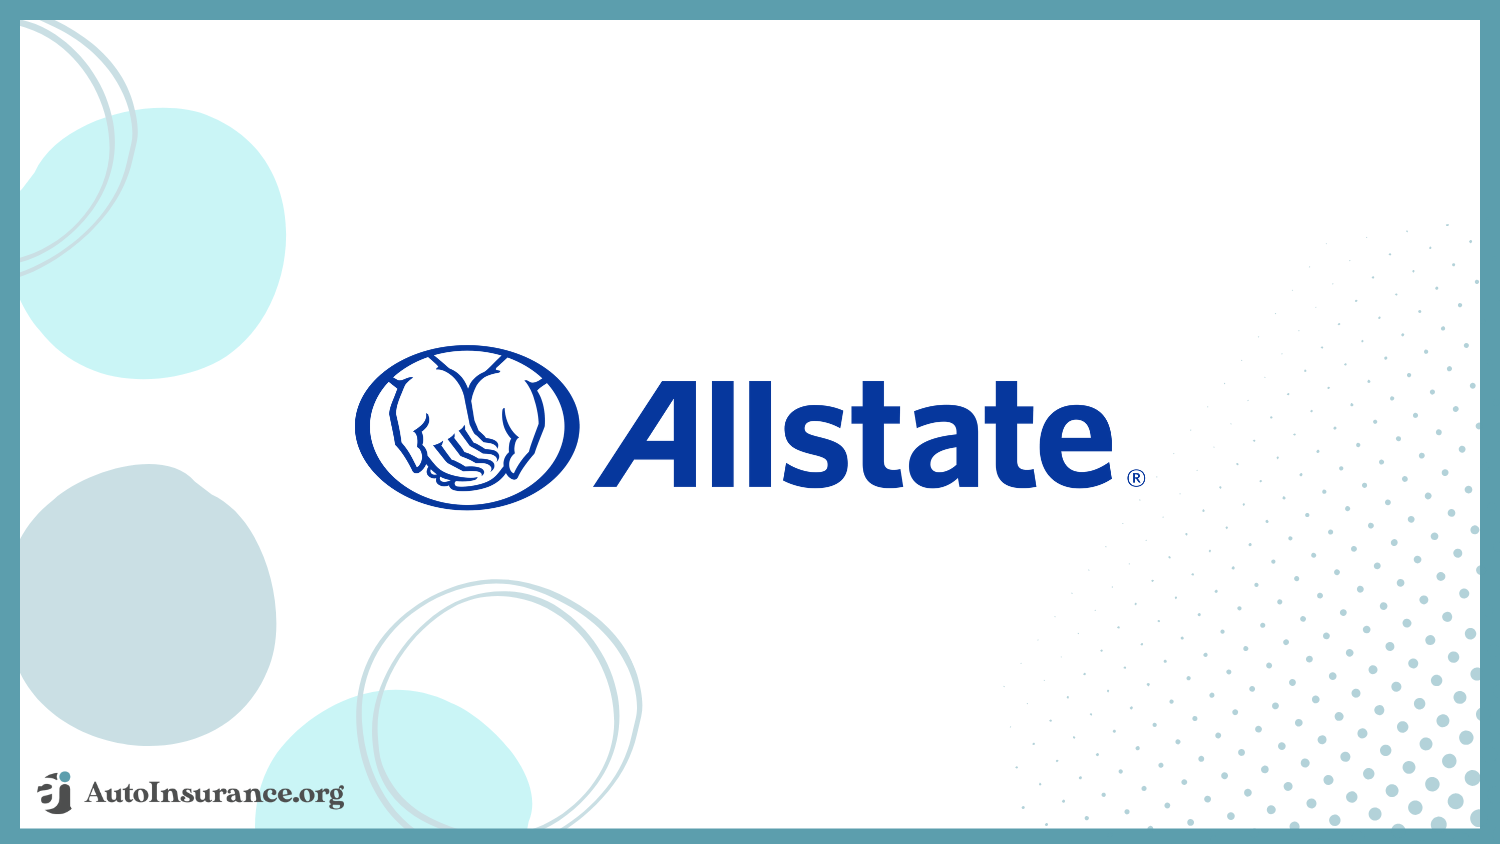 Allstate: Best Auto Insurance for Limousines